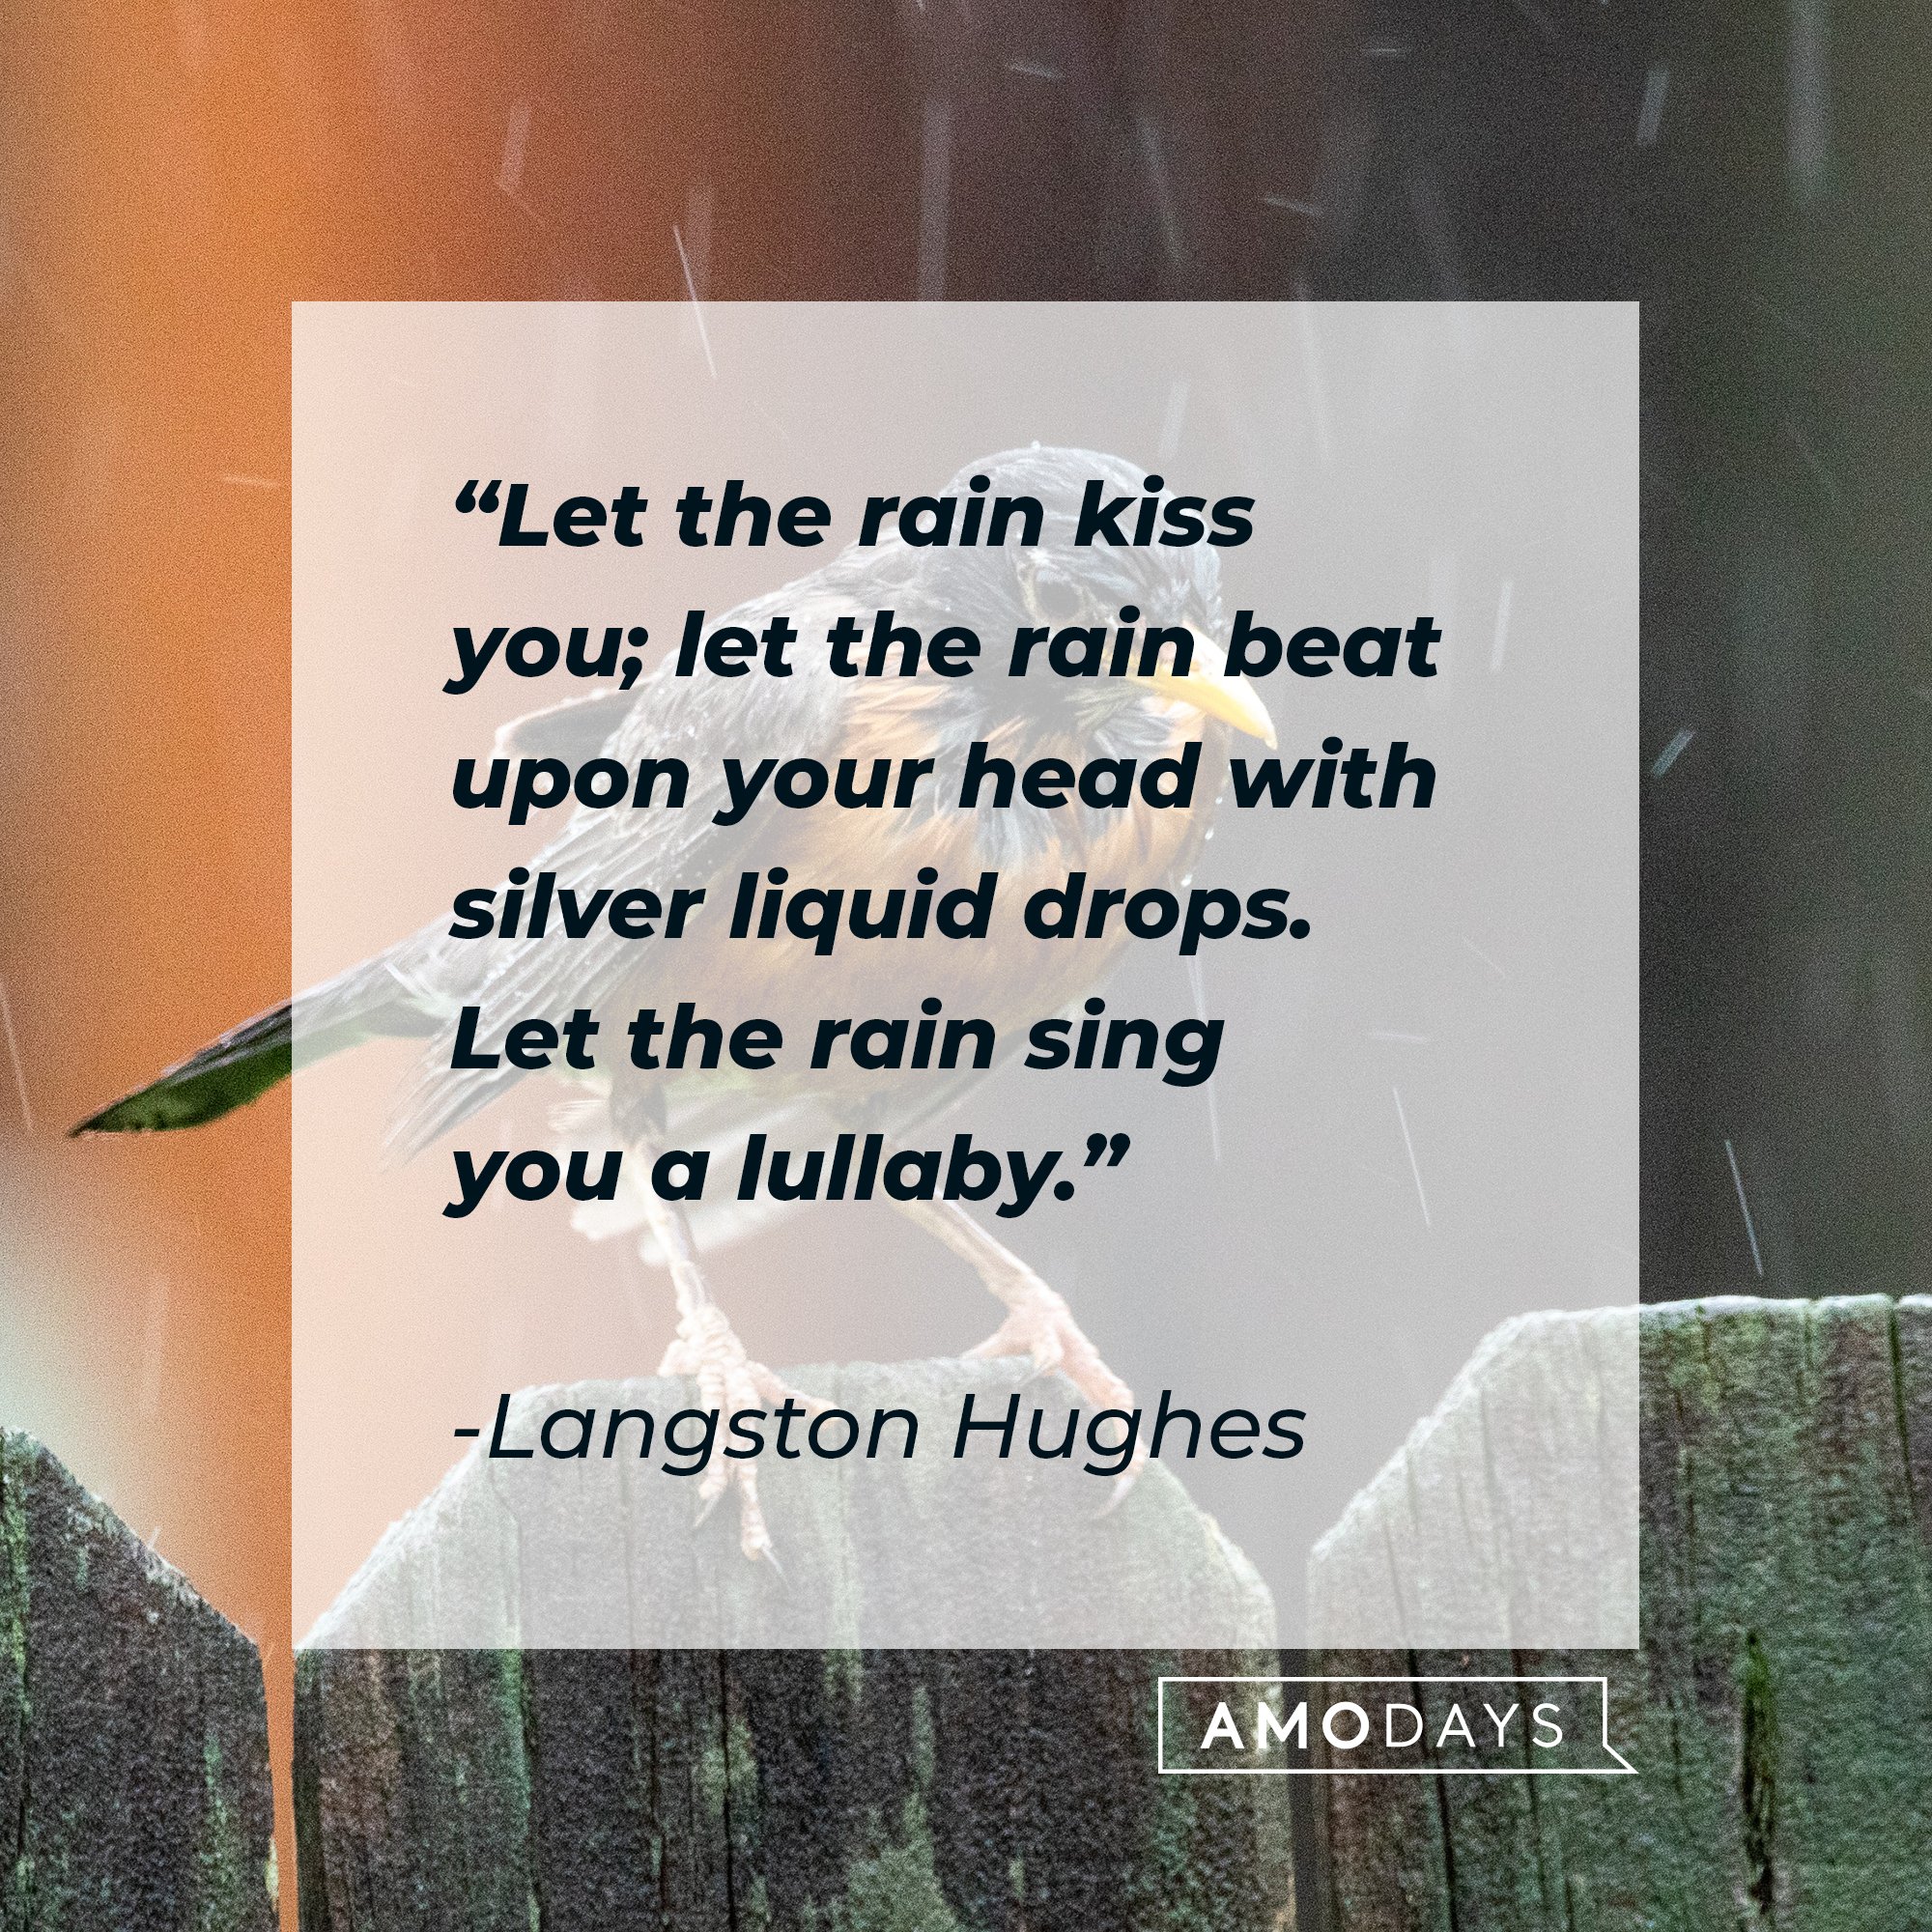 Langston Hughes’ quote: "Let the rain kiss you; let the rain beat upon your head with silver liquid drops. Let the rain sing you a lullaby." | Image: AmoDays